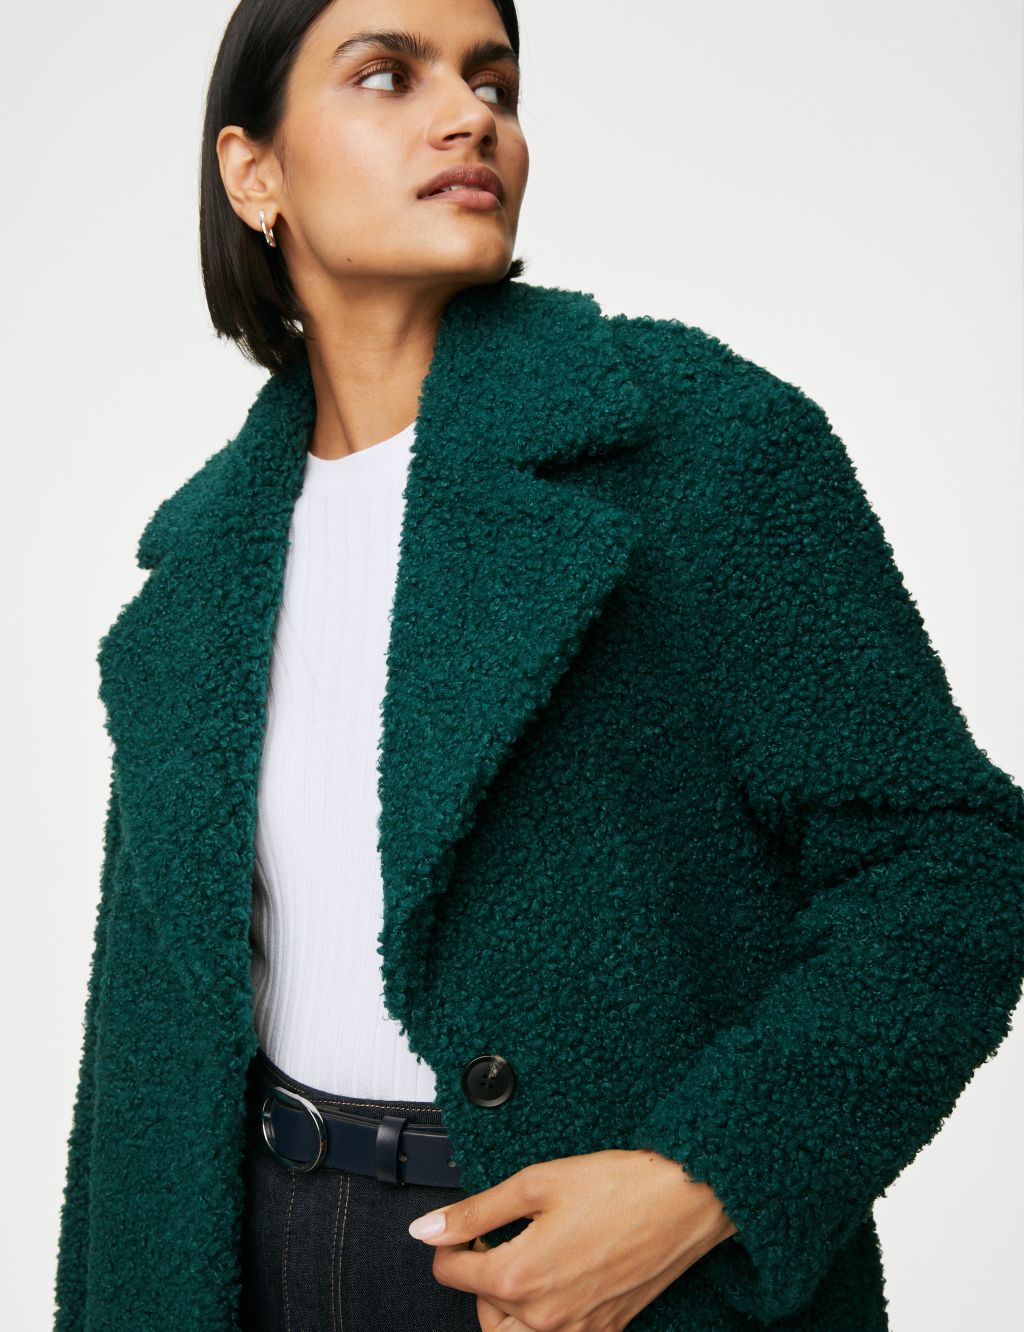 Textured Double Breasted Tailored Coat image 1